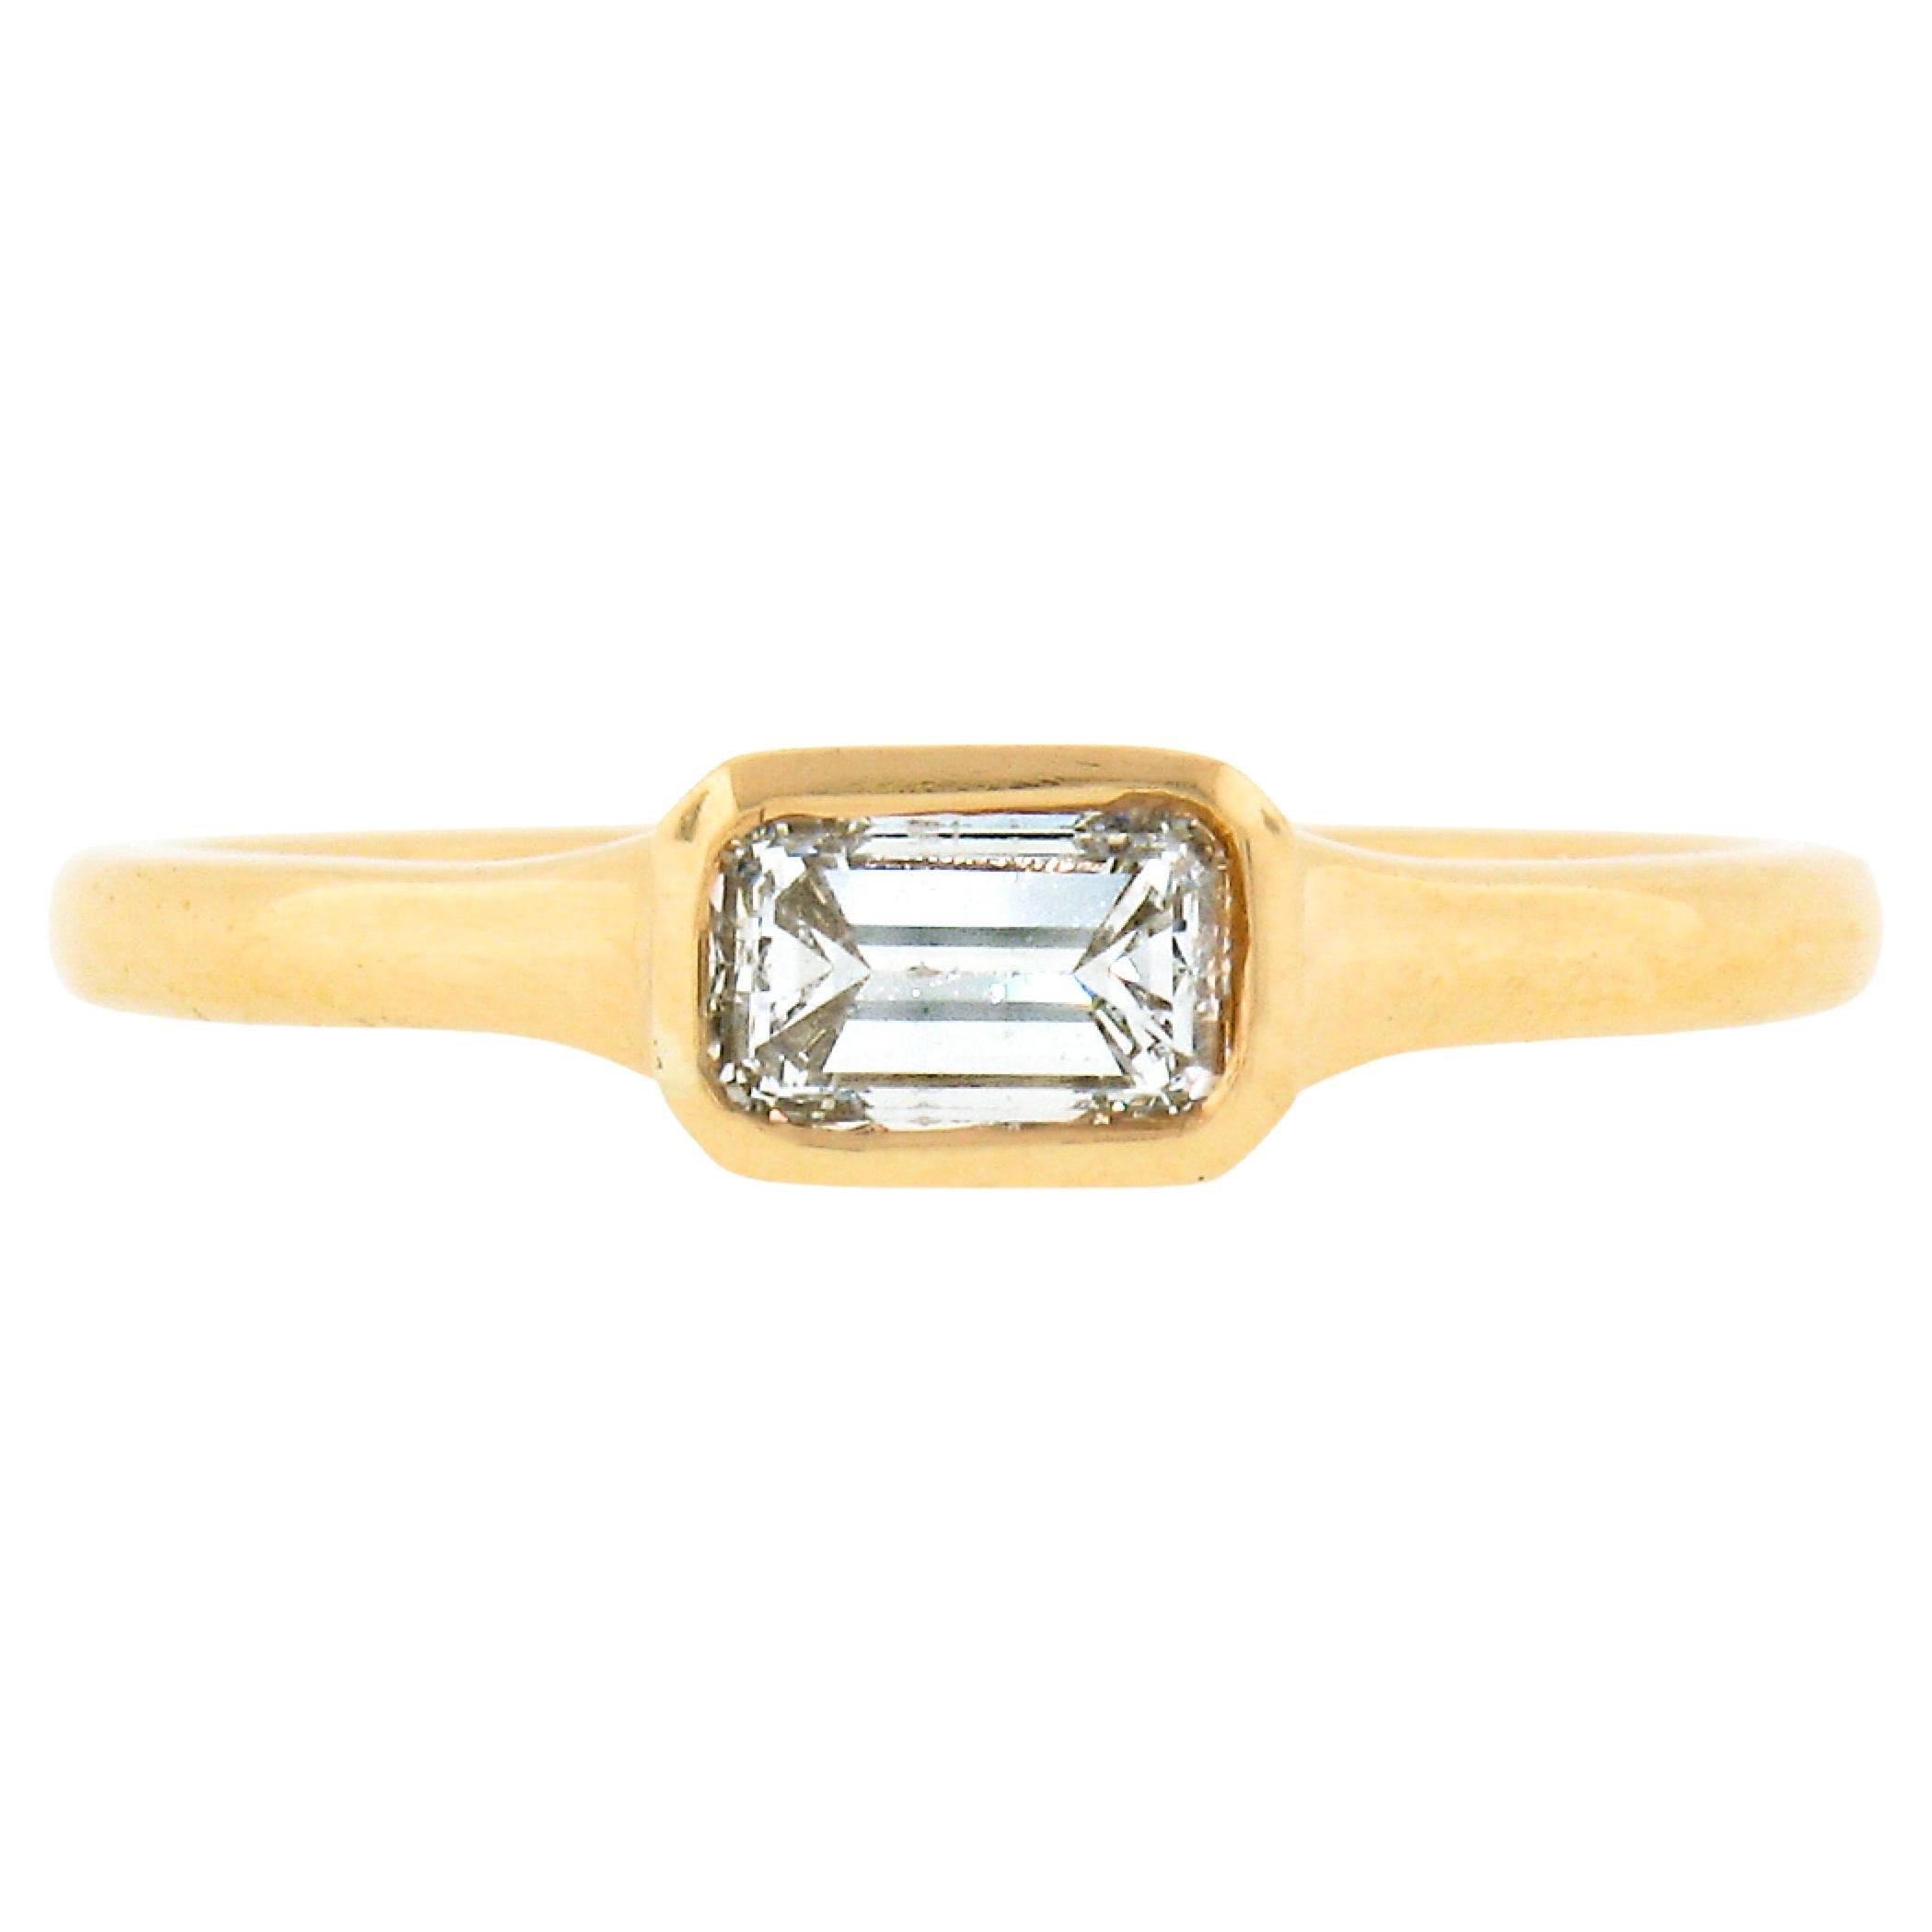 NEW 18k Gold GIA Emerald Cut Sideways Bezel Diamond Solitaire Engagement Ring For Sale